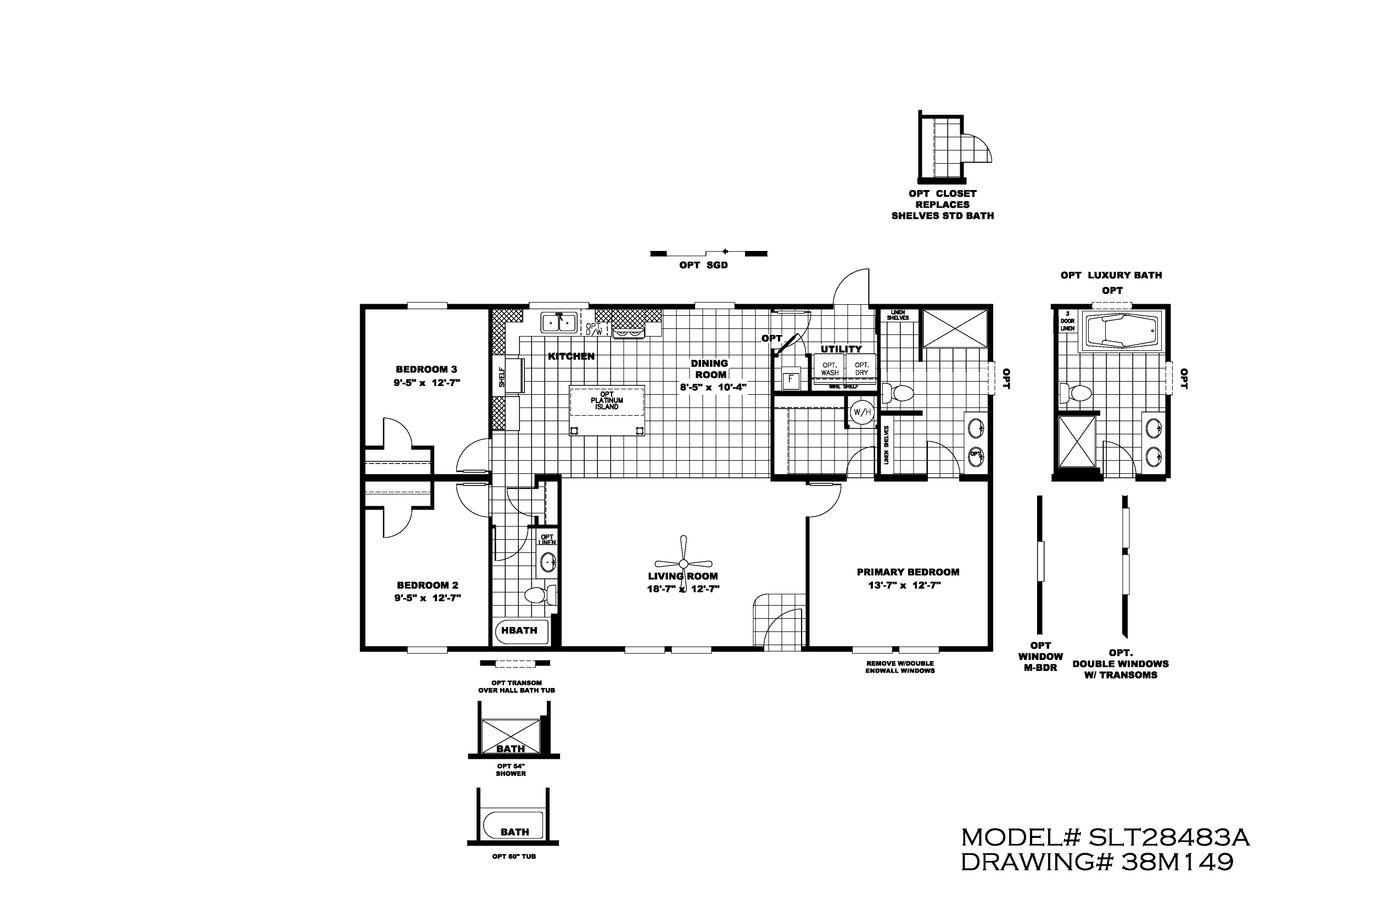 The Real Deal Floor Plan